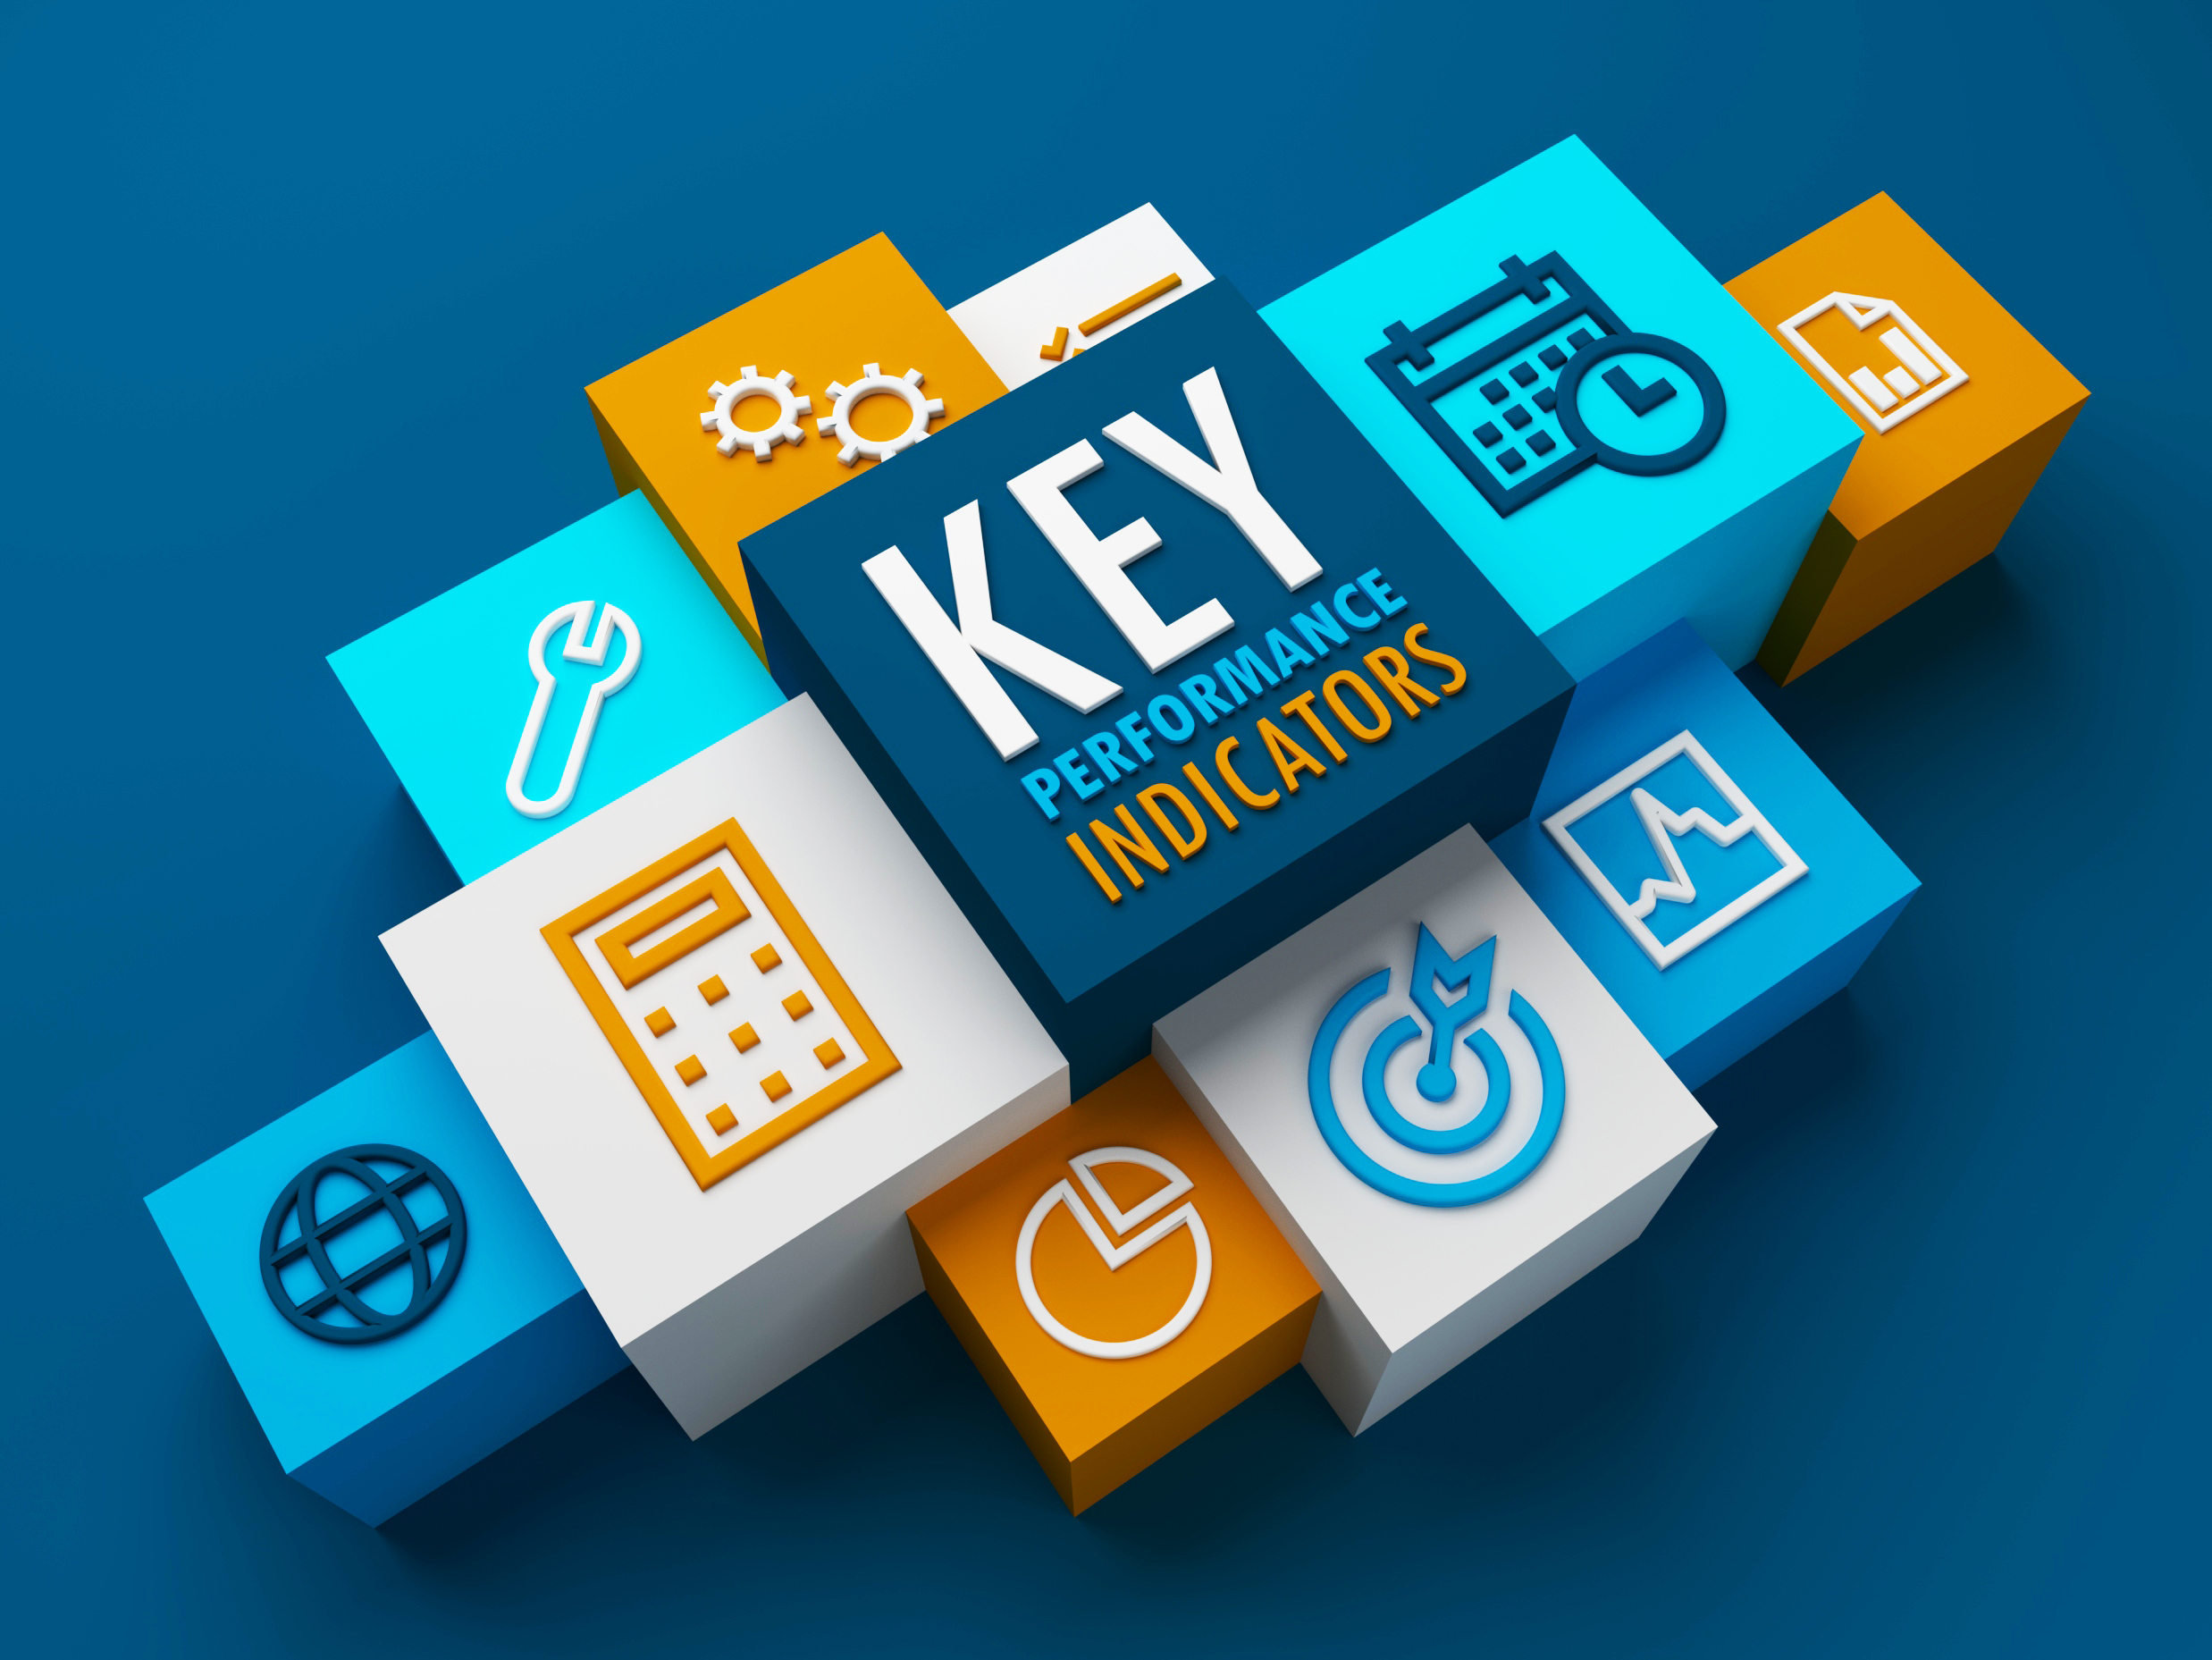 KPIs (Key Performance Indicators) - Leading Indicators vs Lagging Indicators. How to measure these to grow small business. Blog Post by Coach Kevin